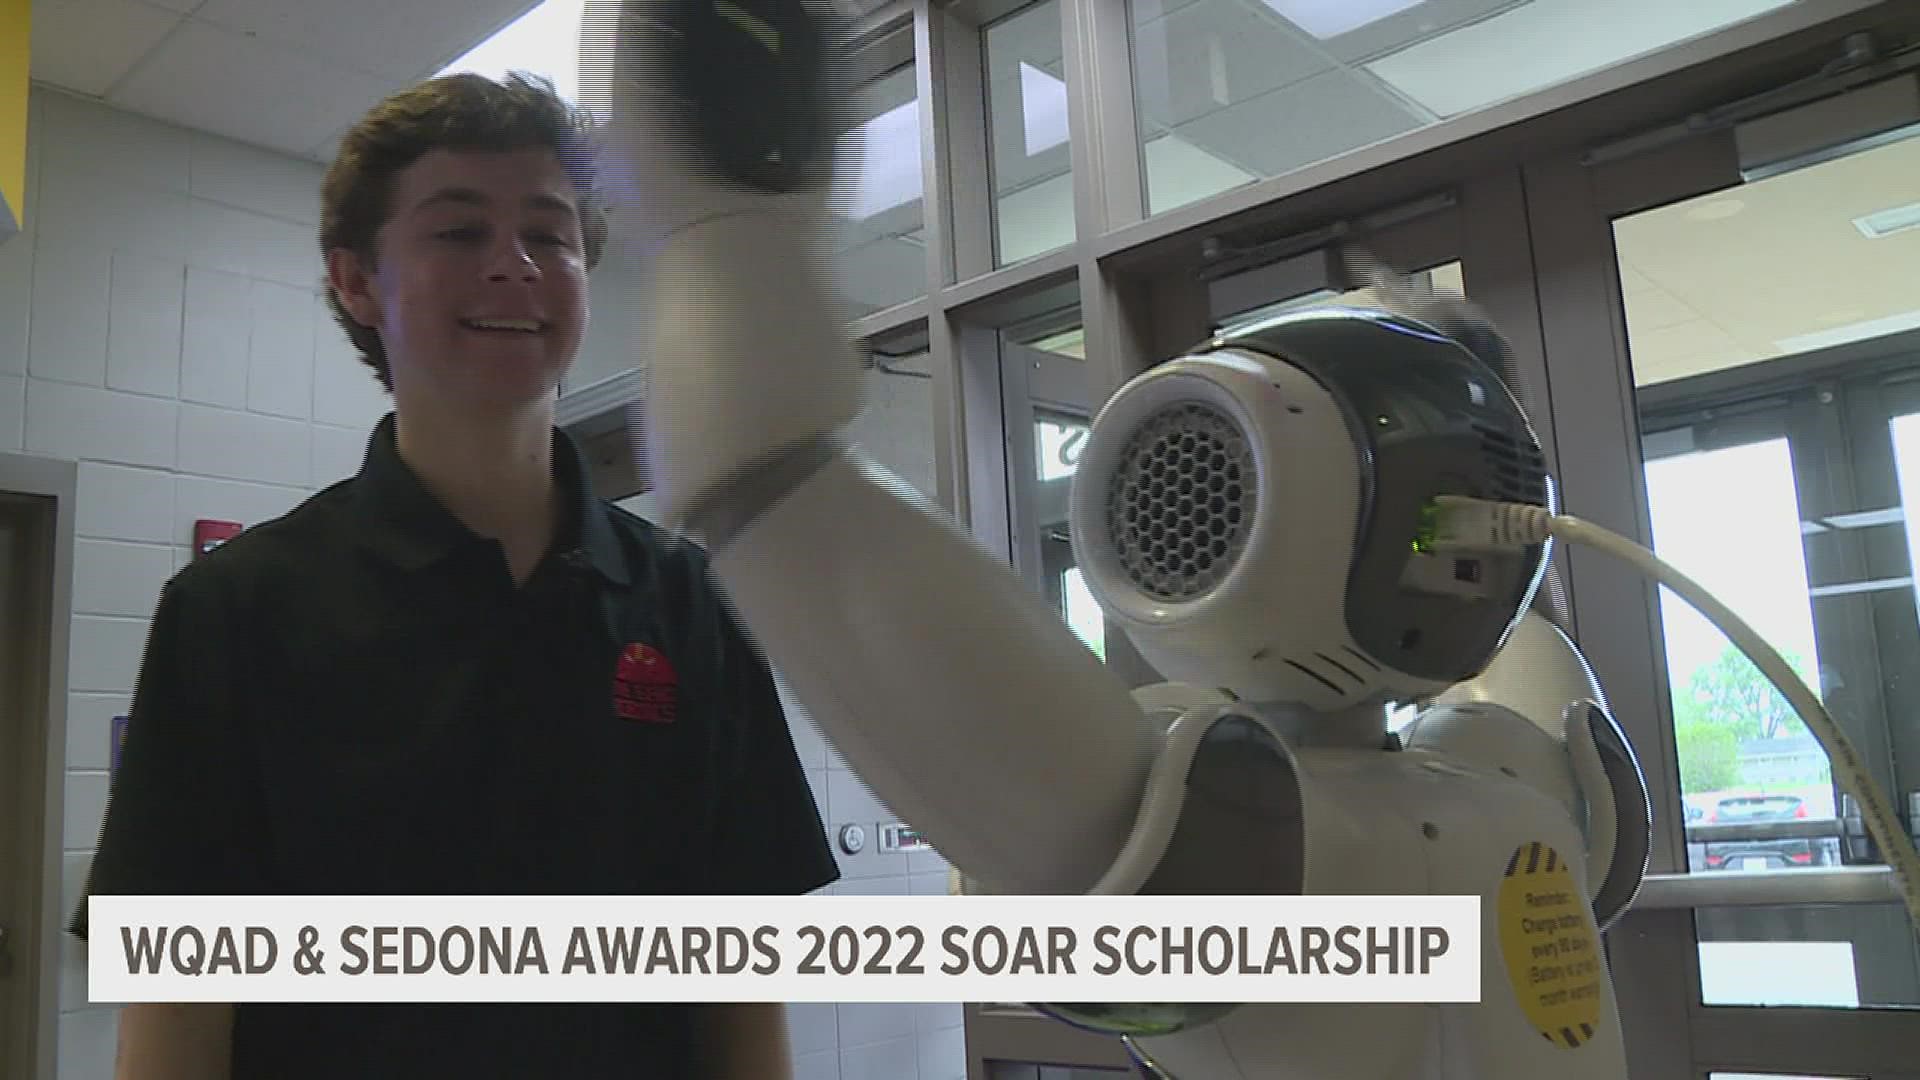 Seventeen-year-old Silas Hoffman of Muscatine is one of three high school seniors receiving a $5,000 SOAR scholarship from The Sedona Group and WQAD News 8.